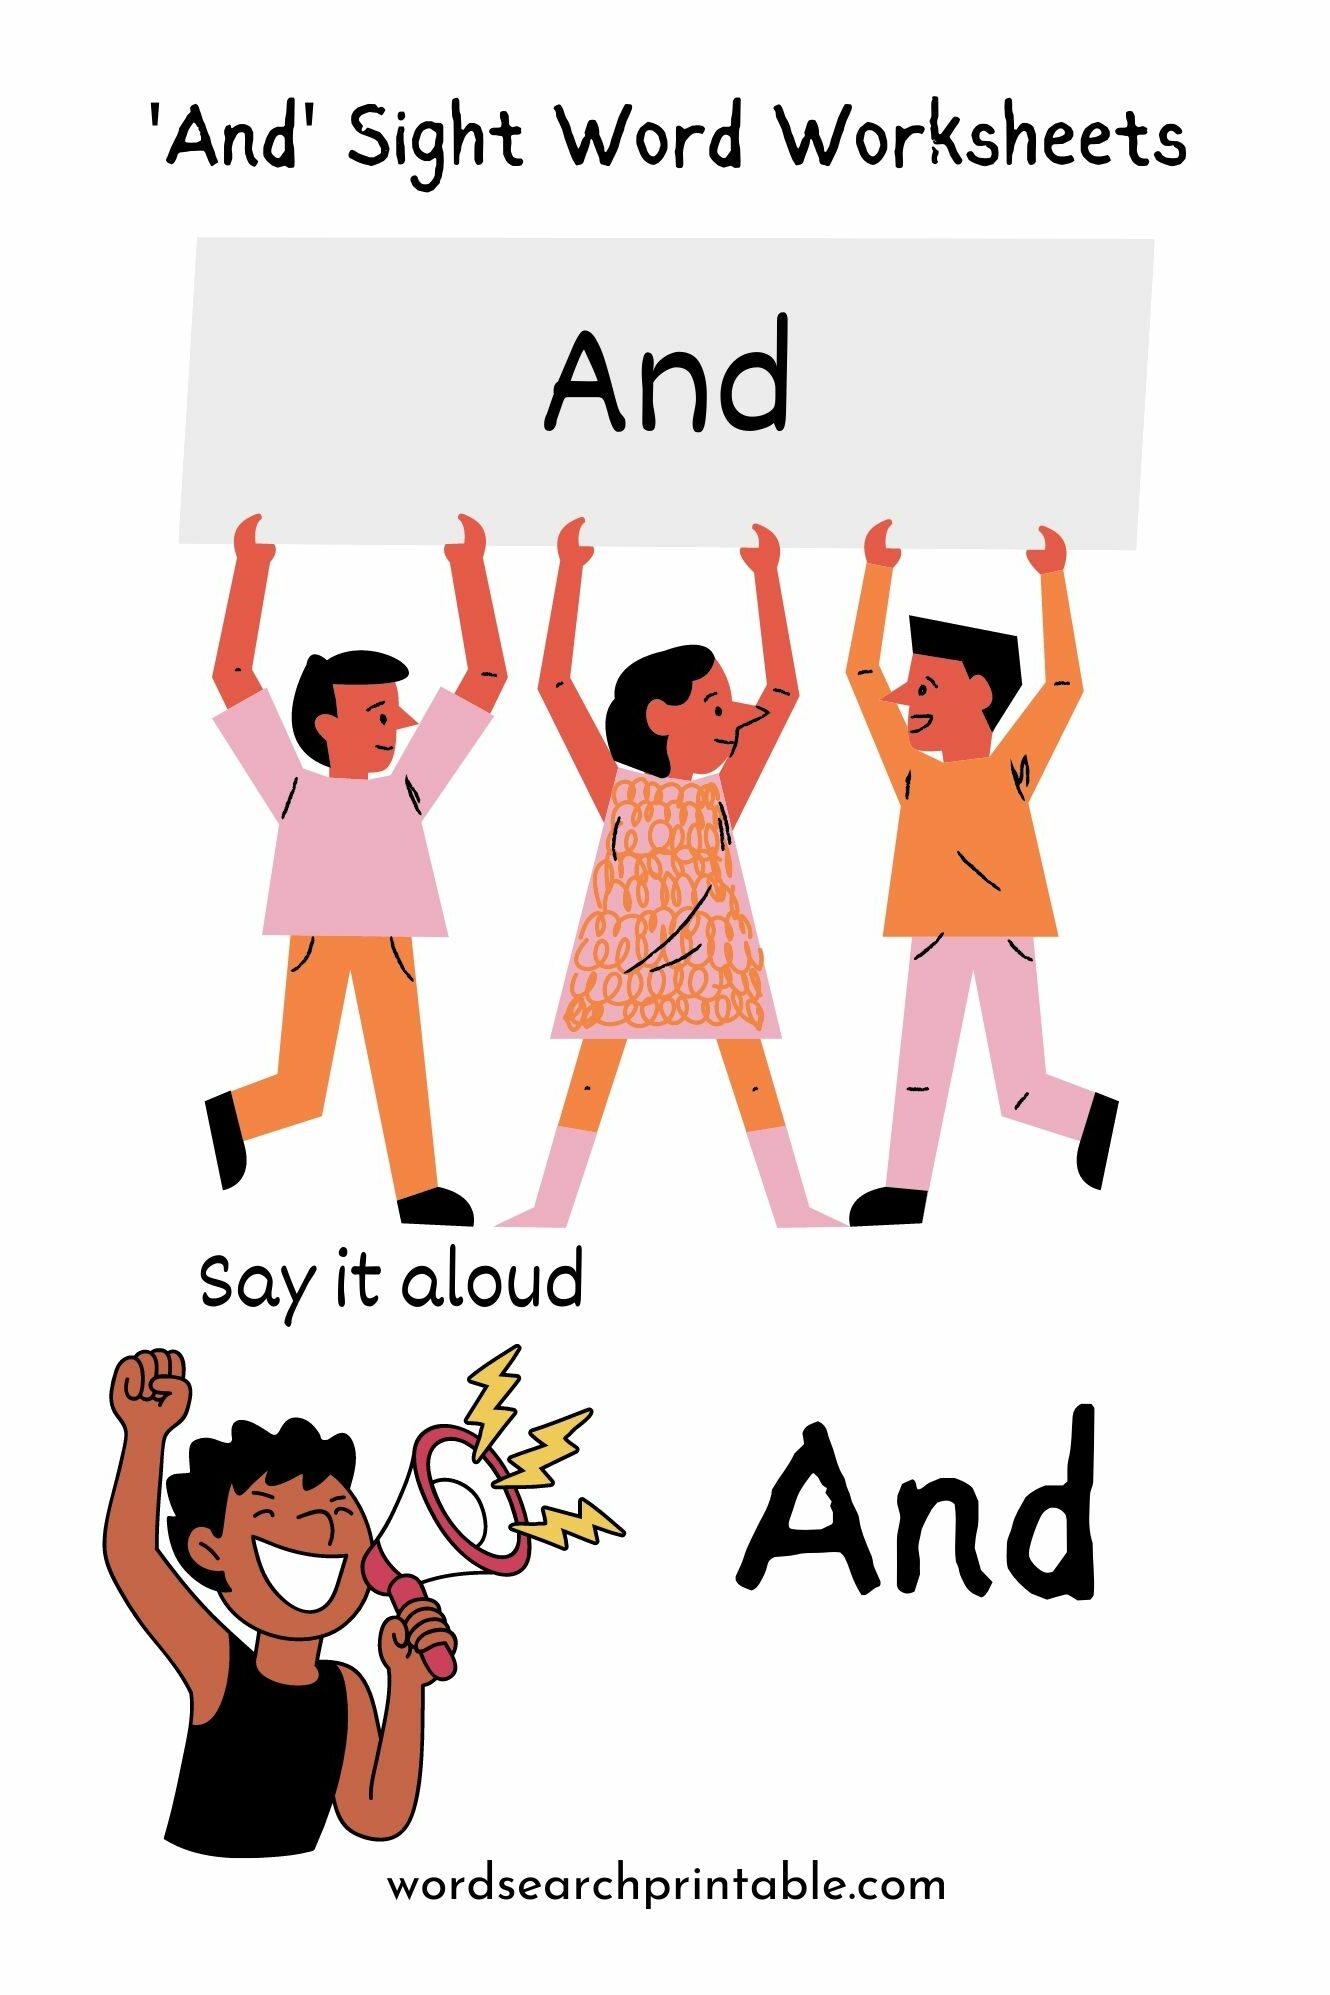 And sight word worksheet